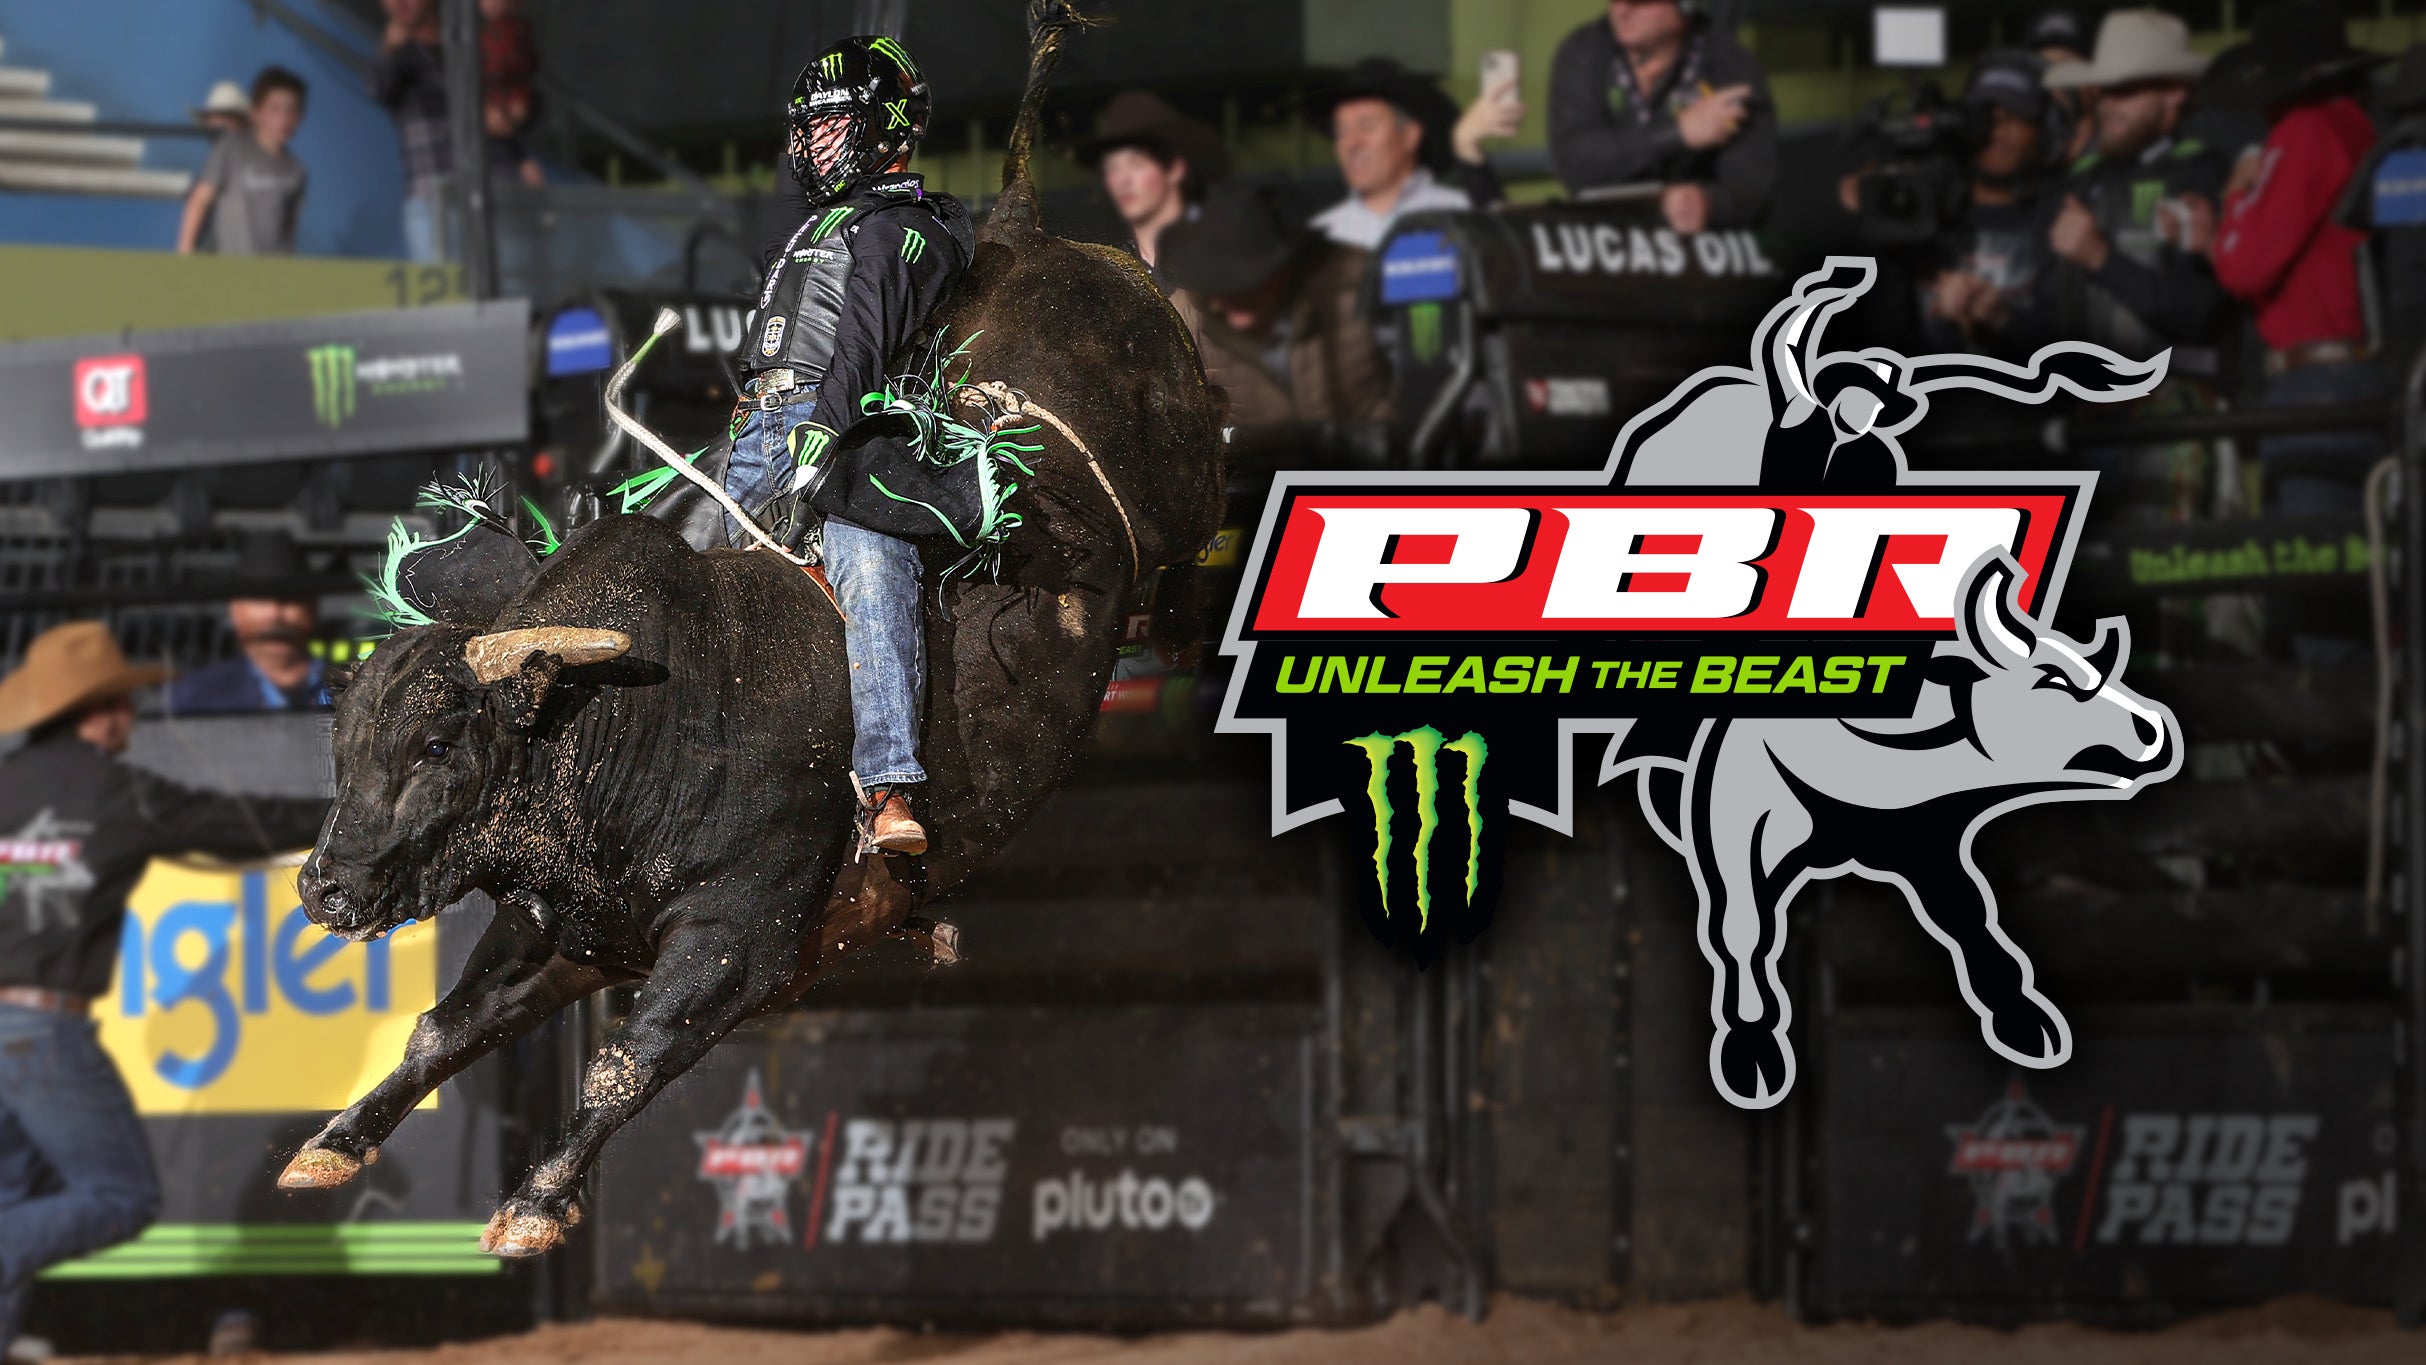 PBR: Unleash the Beast presale code for show tickets in Louisville, KY (KFC Yum! Center)